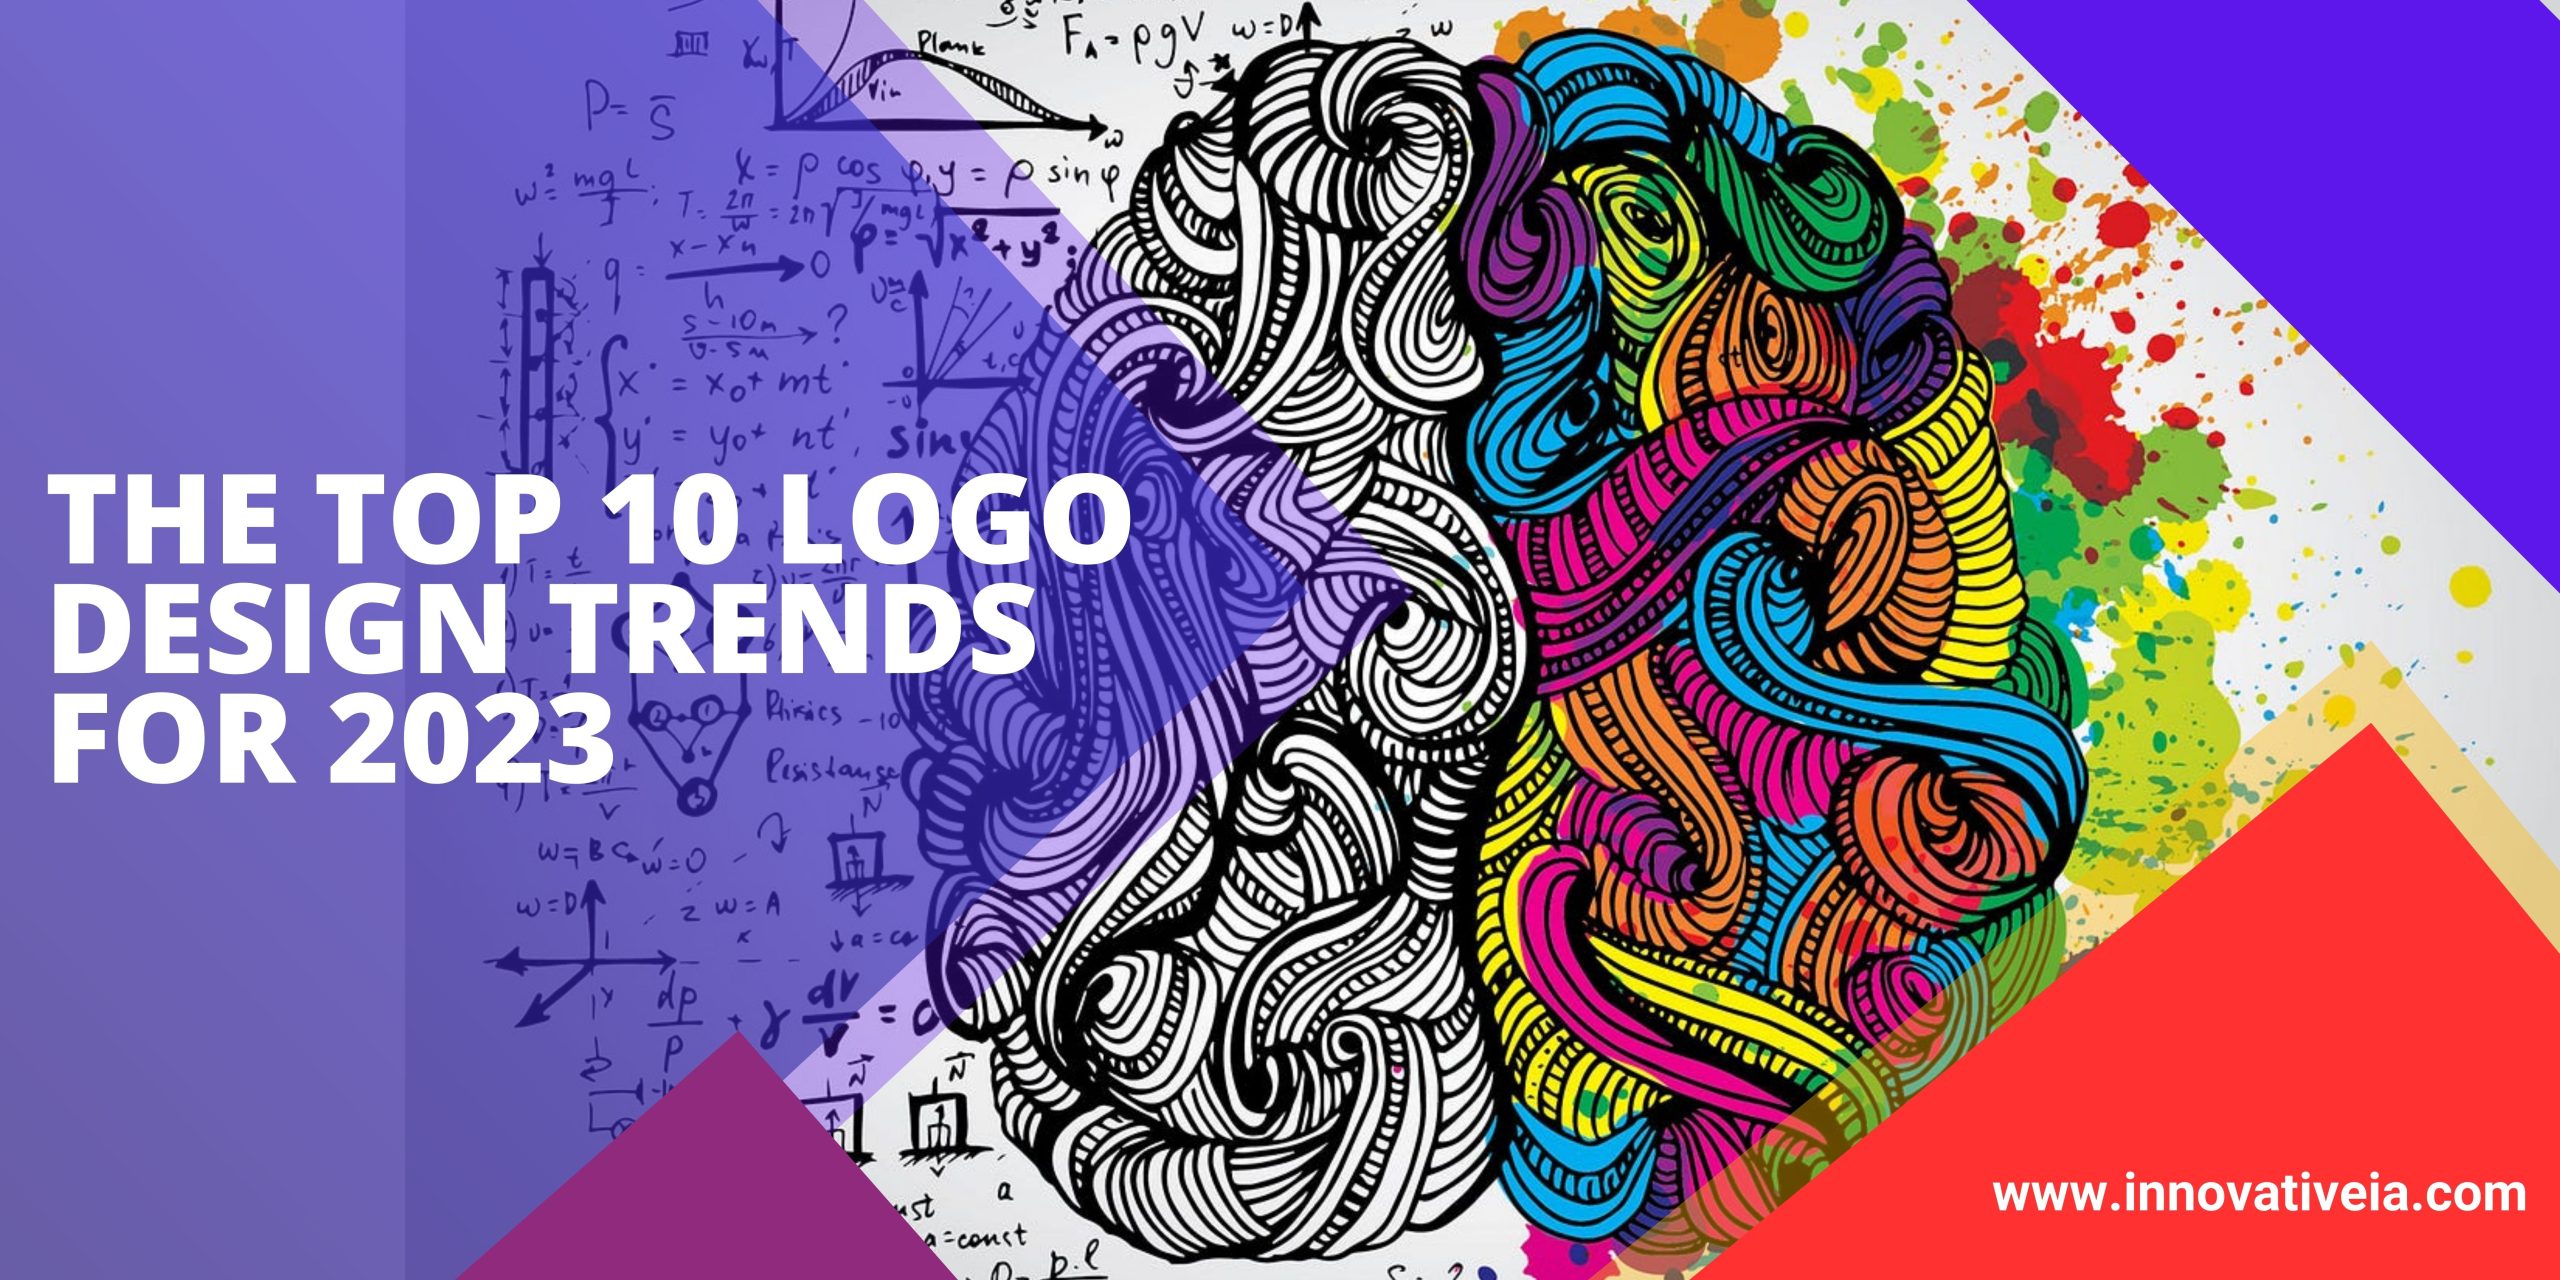 The top 10 logo design trends for 2023